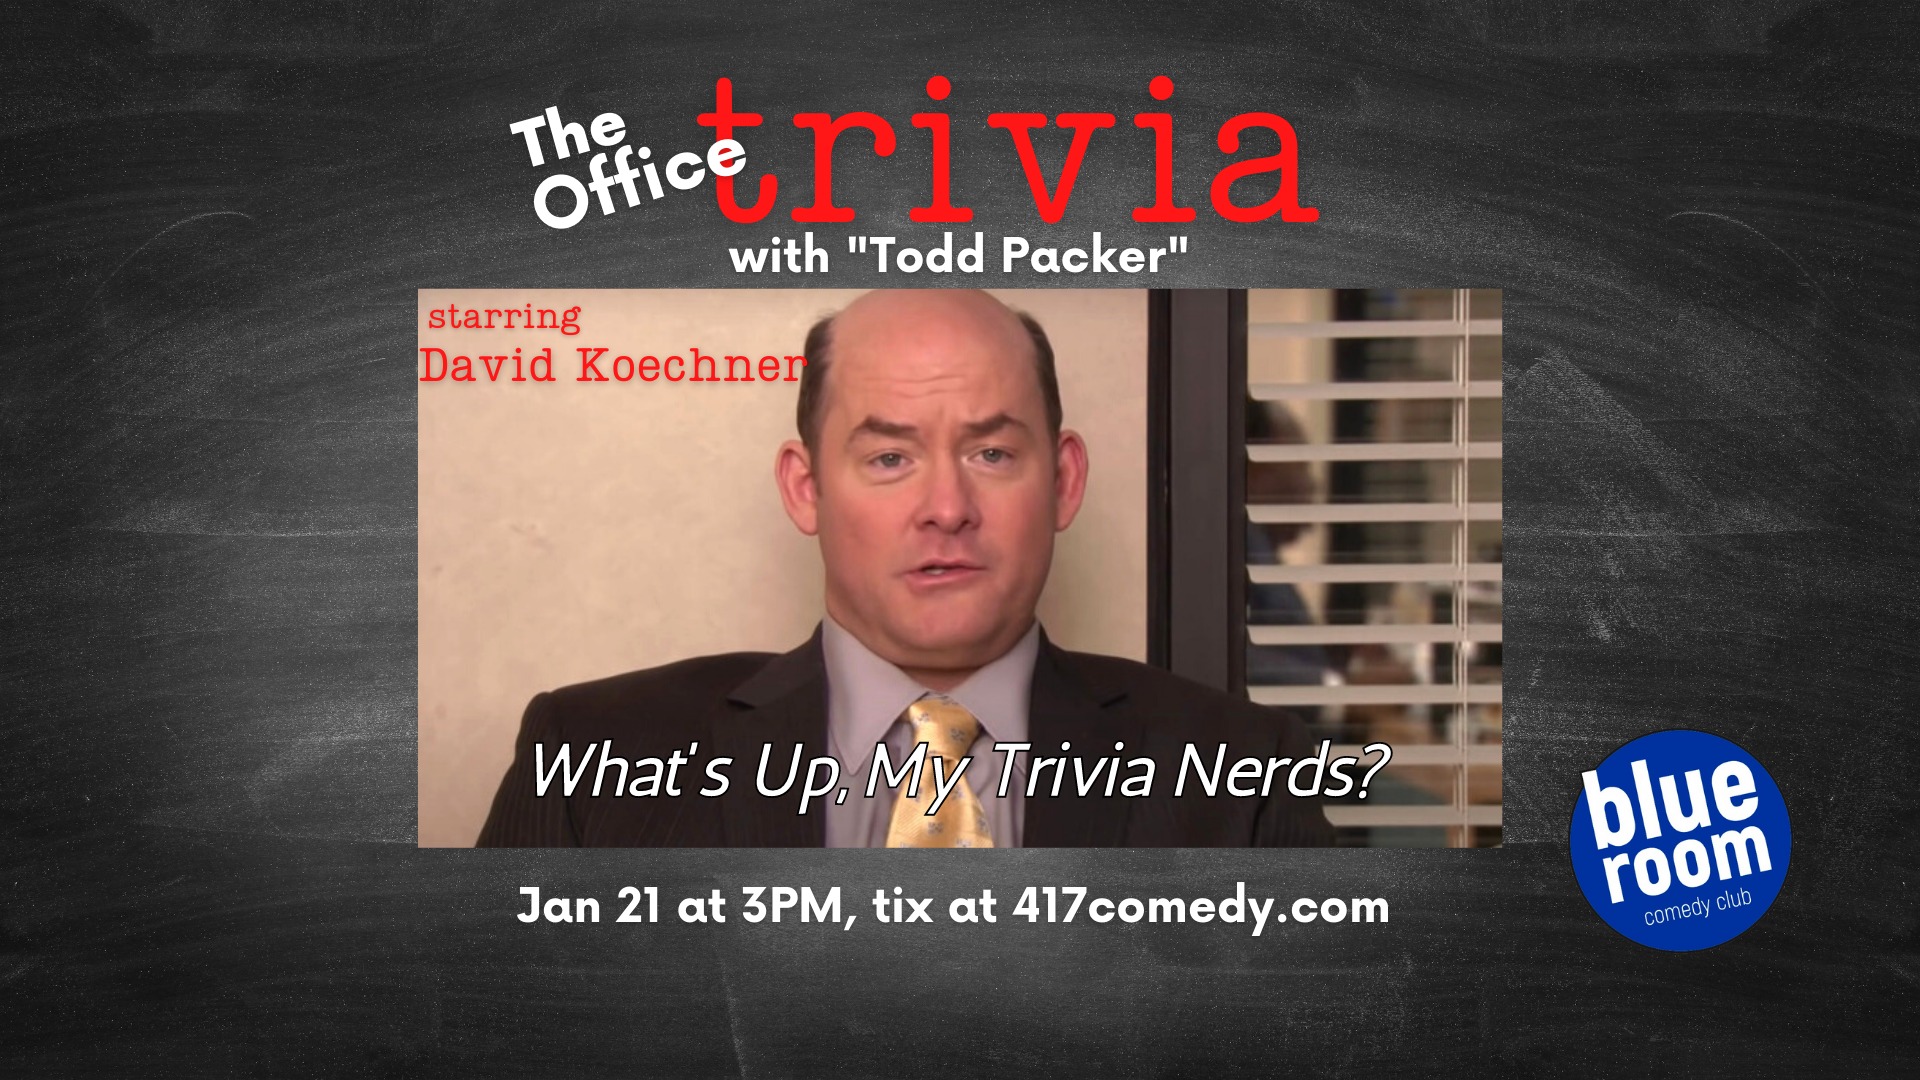 The Office Trivia with Todd Packer